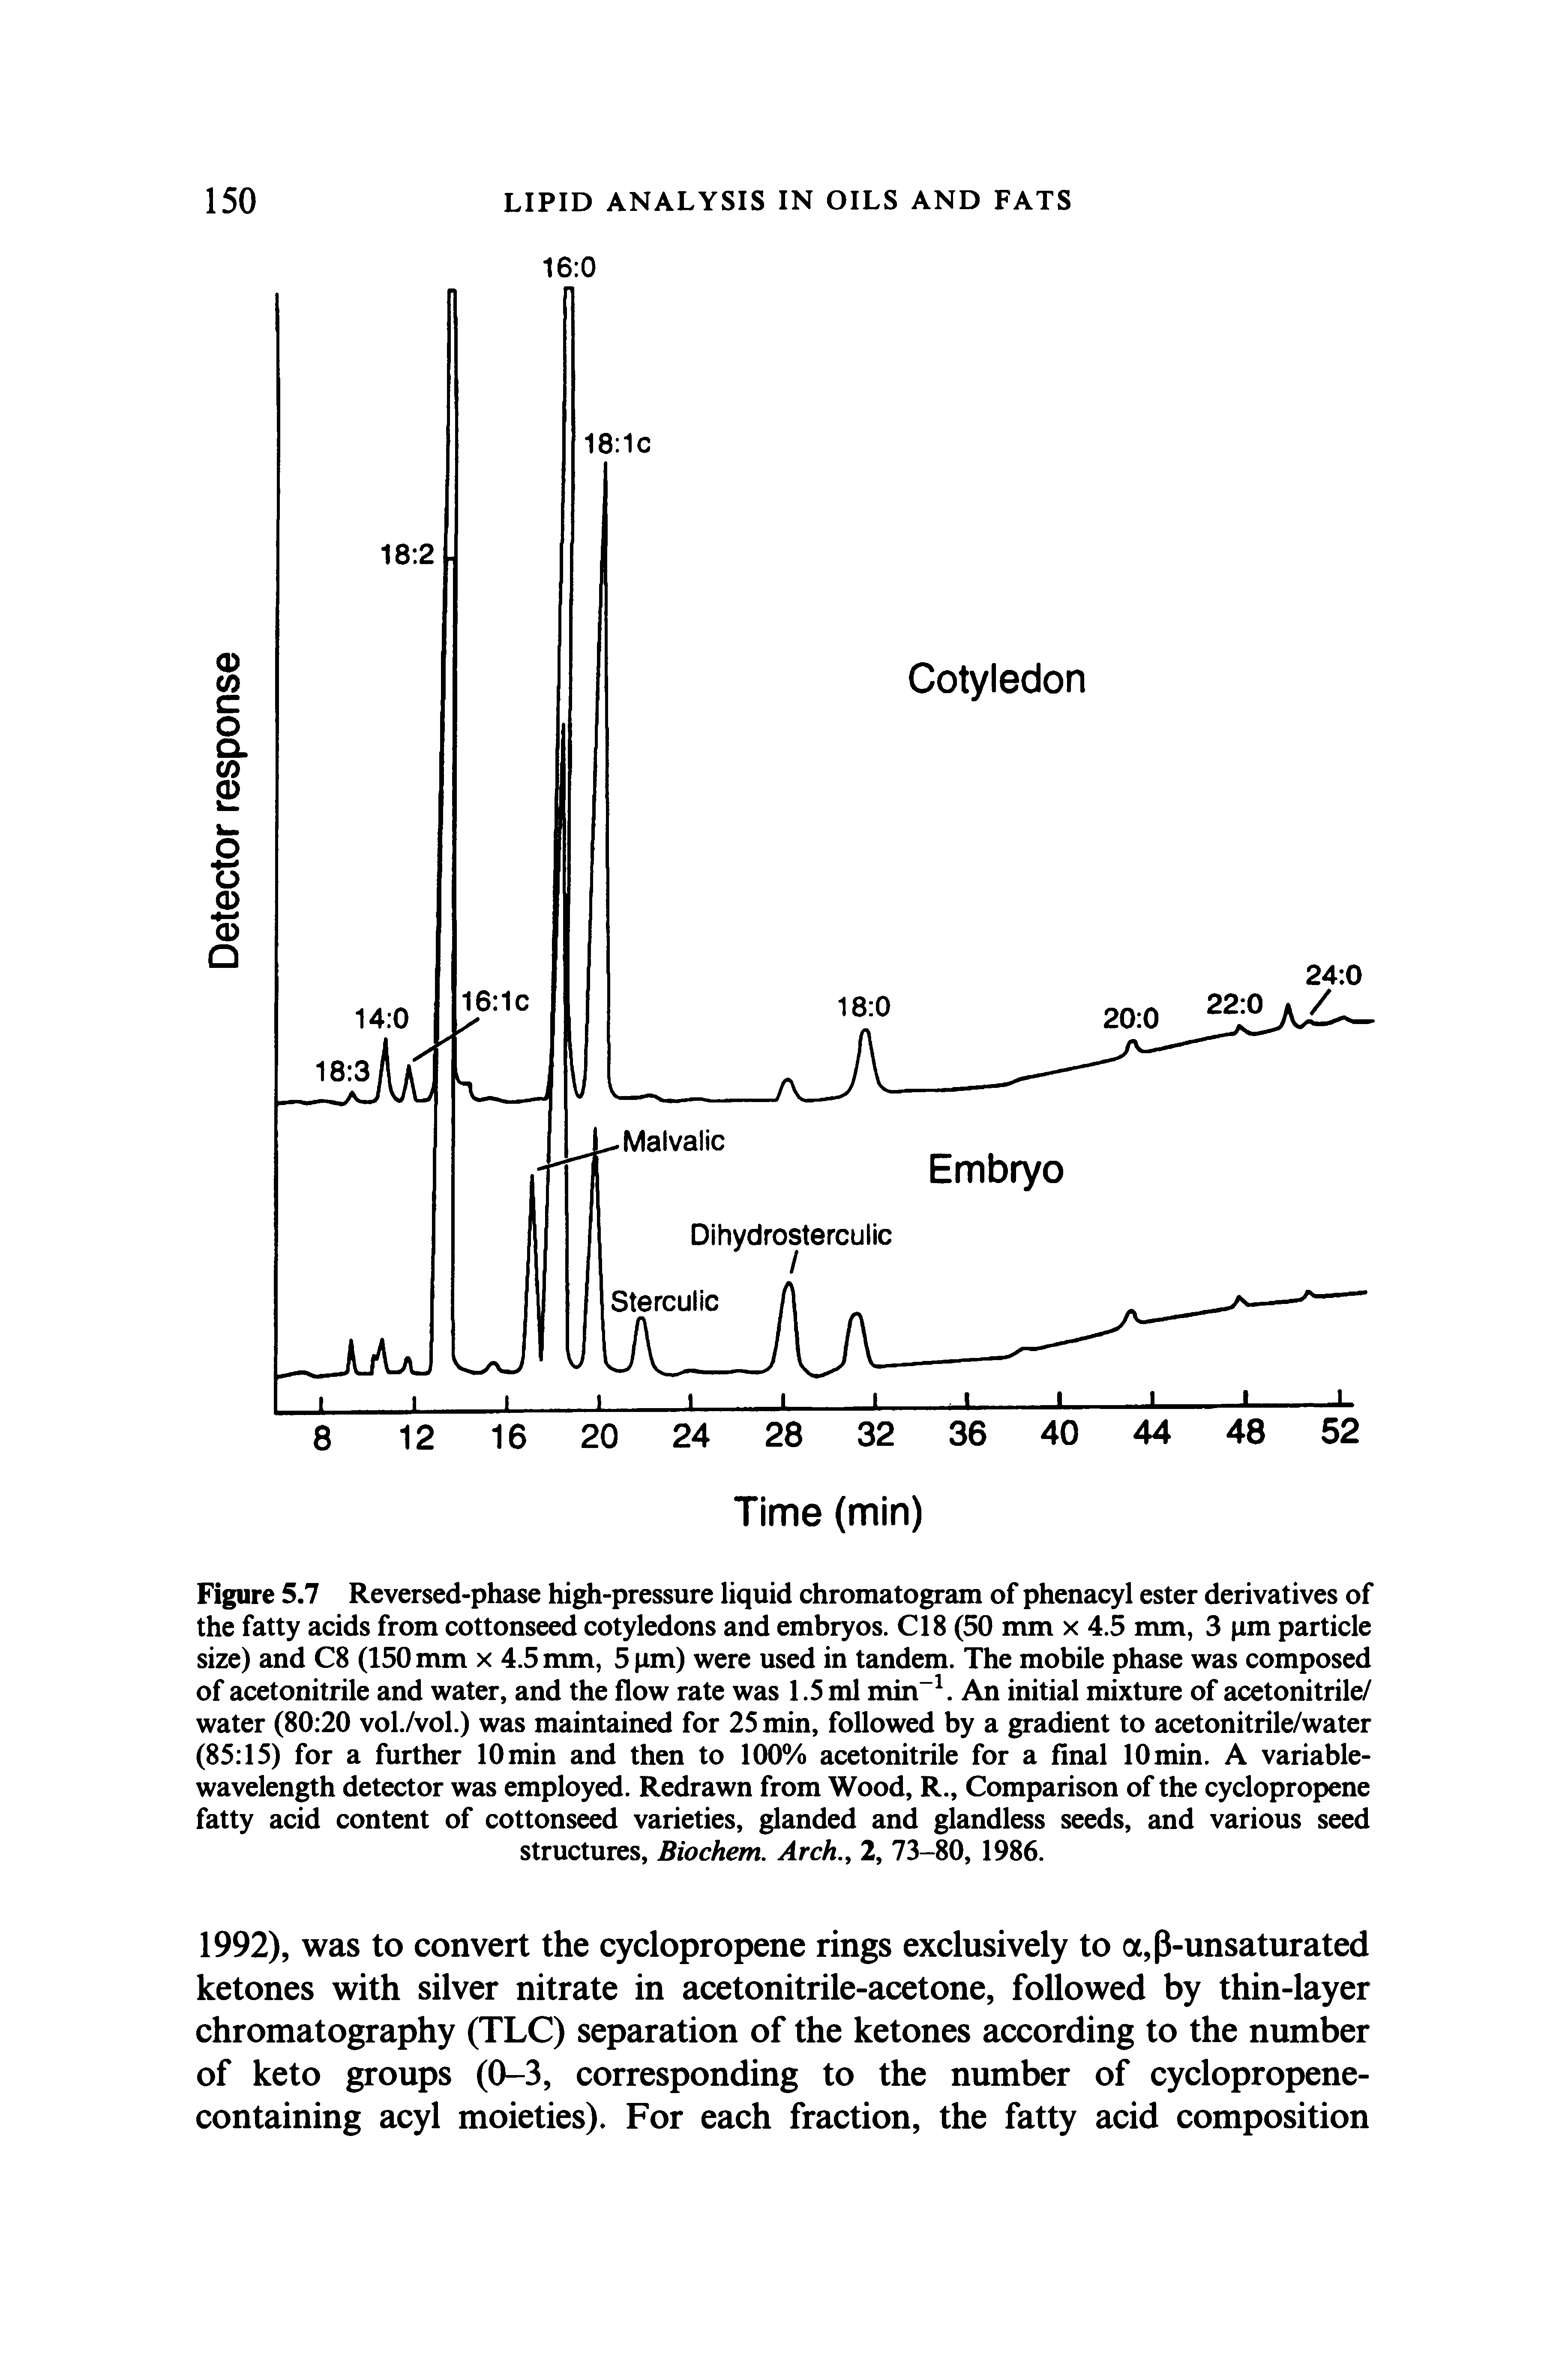 Figure 5.7 Reversed-phase high-pressure liquid chromatogram of phenacyl ester derivatives of the fatty acids from cottonseed cotyledons and embryos. CIS (50 nun x 4.5 nun, 3 pm particle size) and C8 (150 nun x 4.5 nun, 5 pm) were used in tandem. The mobile phase was composed of acetonitrile and water, and the flow rate was 1.5 ml min . An initial mixture of acetonitrile/ water (80 20 vol./vol.) was maintained for 25 min, followed by a gradient to acetonitrile/water (85 15) for a further 10 min and then to 100% acetonitrile for a final 10 min. A variable-wavelength detector was employed. Redrawn from Wood, R., Comparison of the cyclopropene fatty acid content of cottonseed varieties, glanded and glandless seeds, and various seed structures, Biochem. Arch., 2, 73-80, 1986.